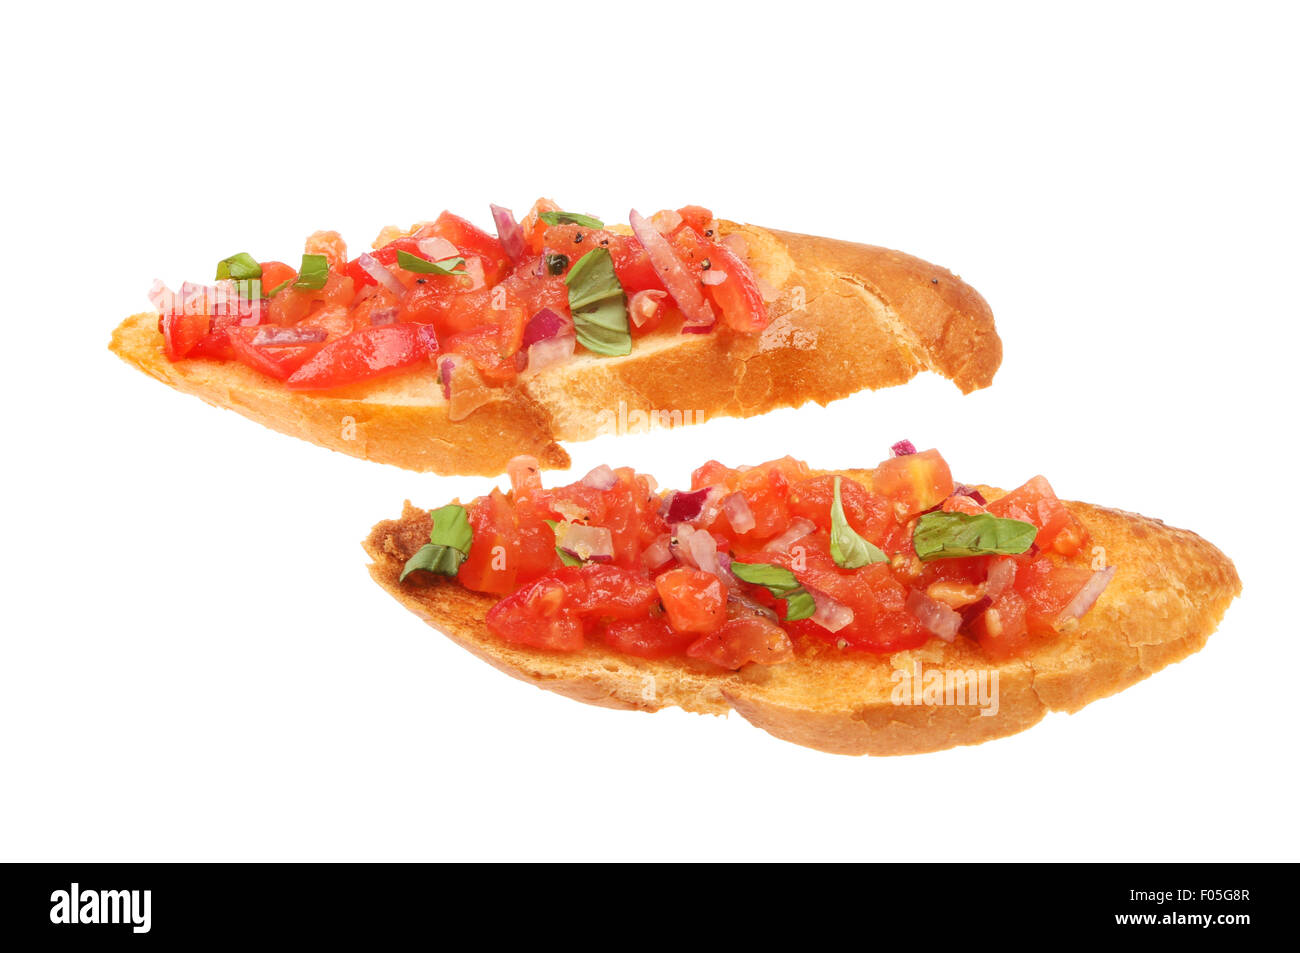 Two slices of tomato, red onion and basil bruschetta isolated against white Stock Photo